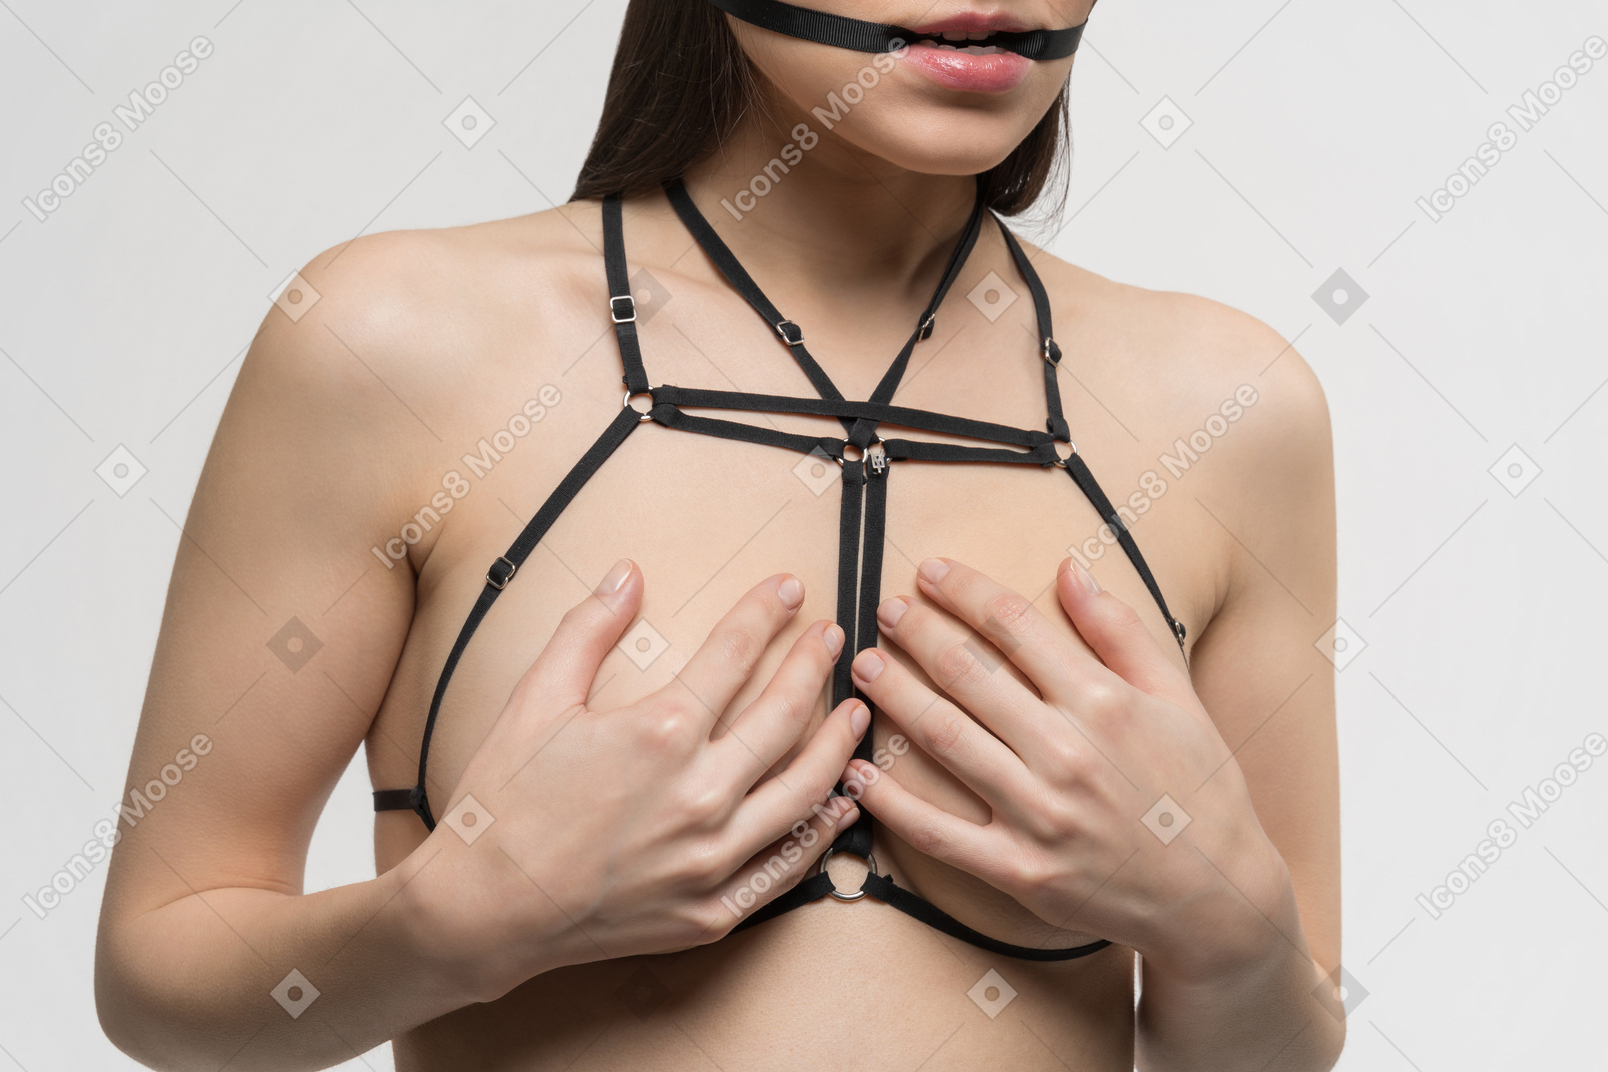 Front view of sexy young woman covering breast with hands